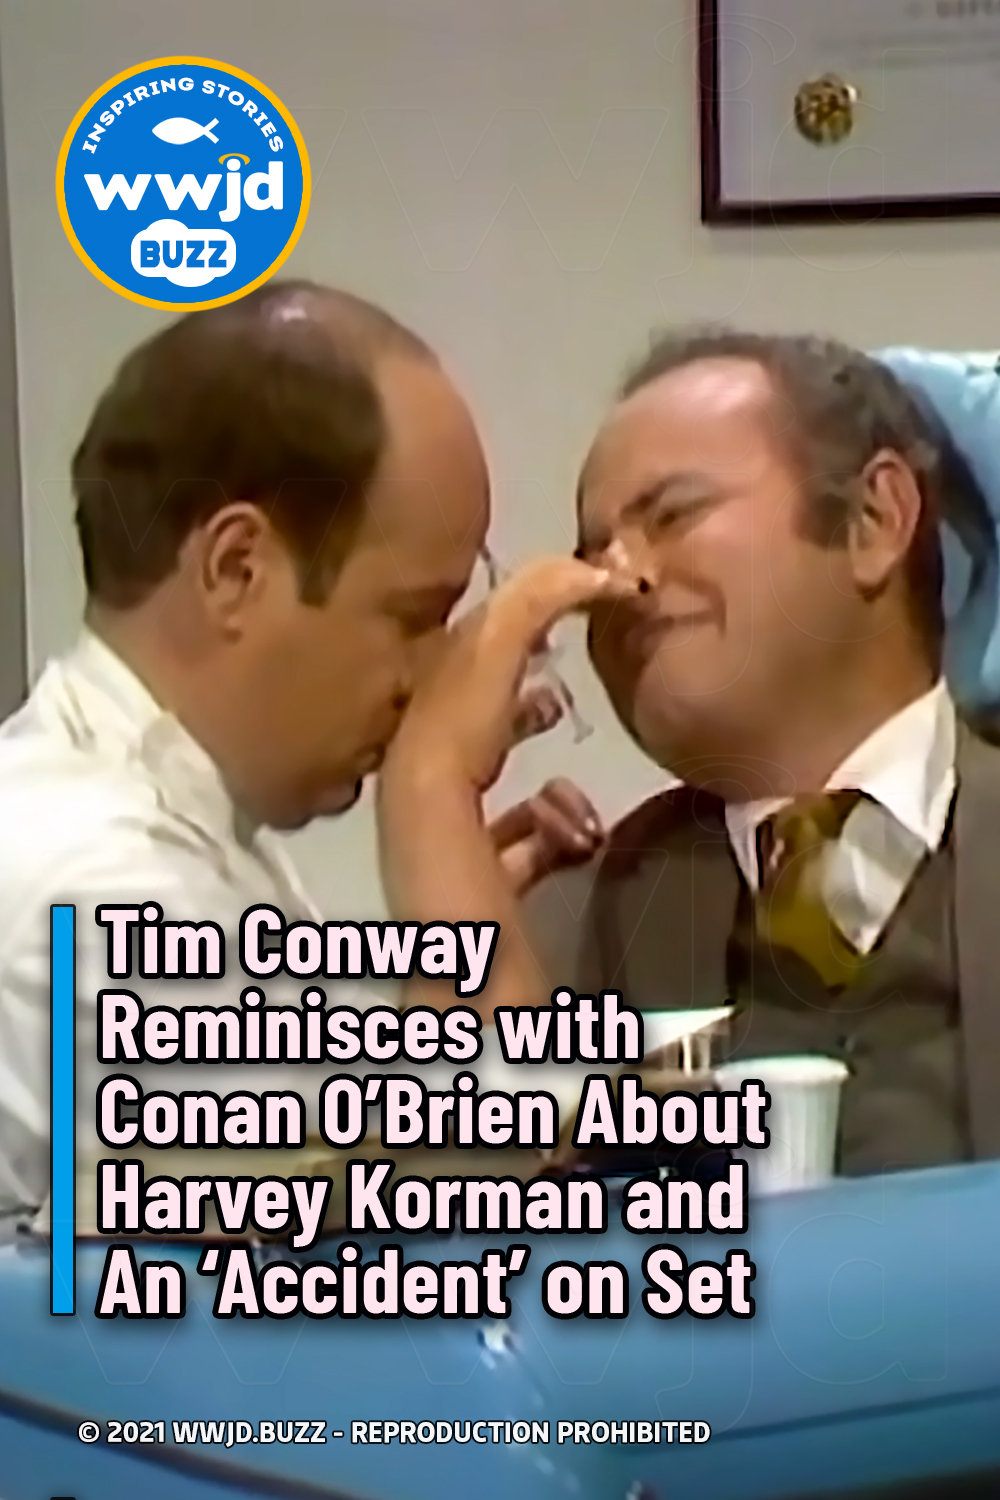 Tim Conway Reminisces with Conan O\'Brien About Harvey Korman and An \'Accident\' on Set